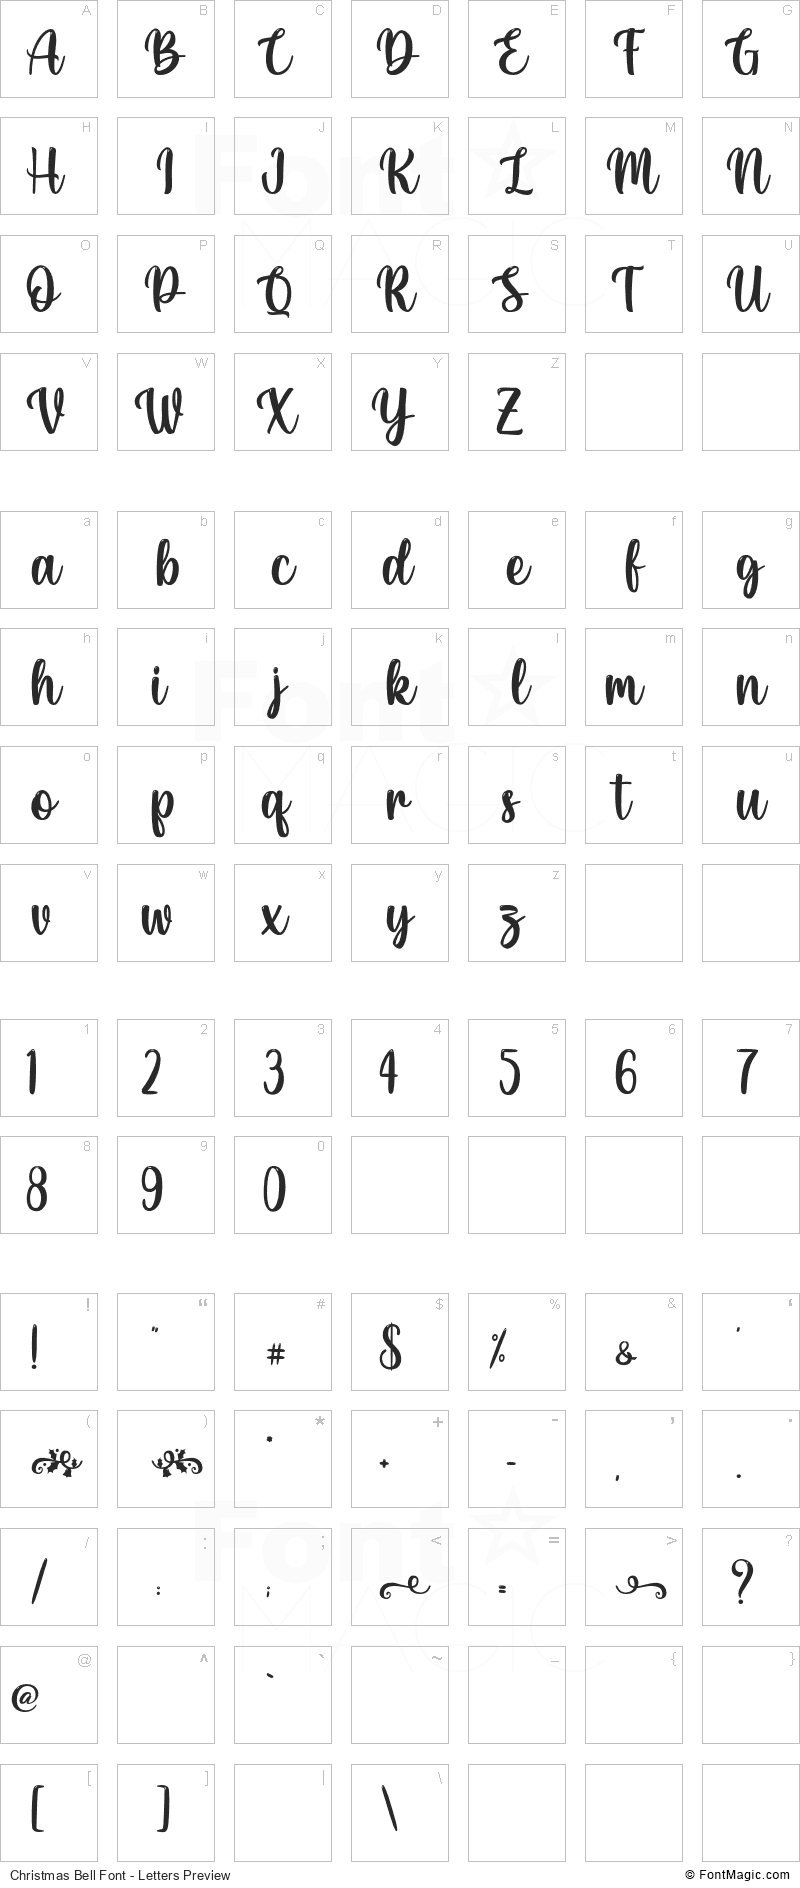 Christmas Bell Font - All Latters Preview Chart